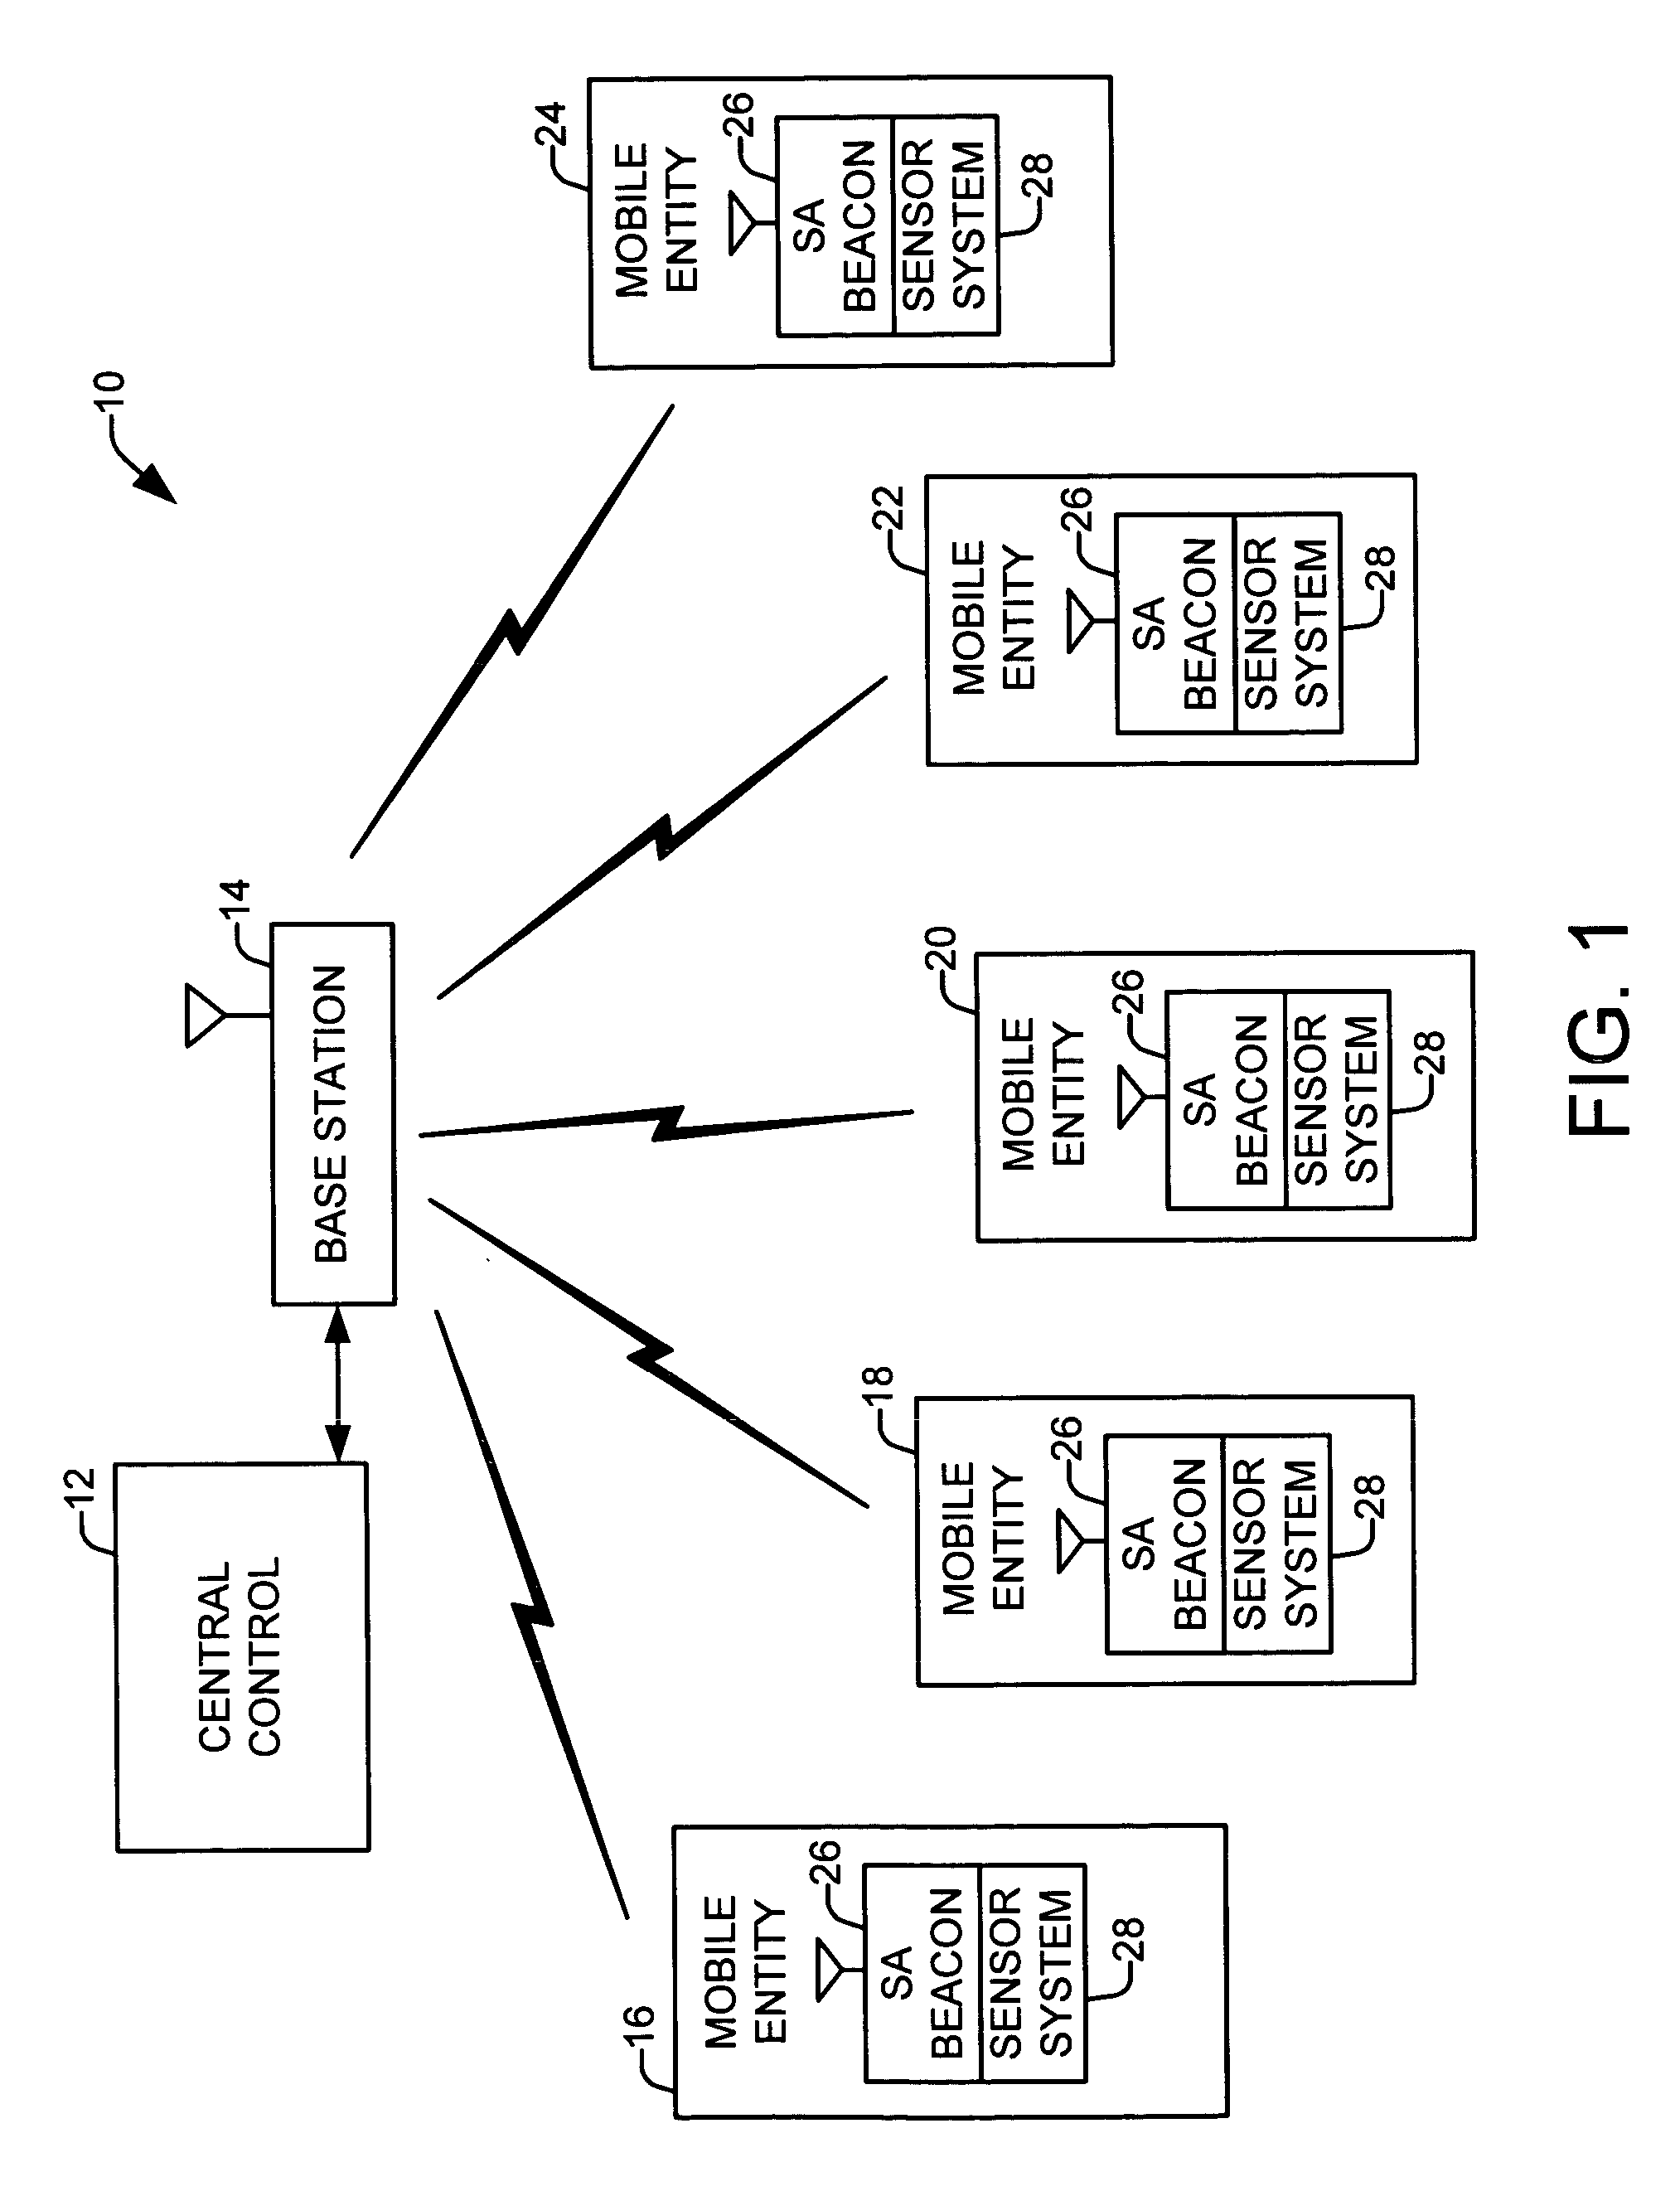 Systems and methods for condition and location monitoring of mobile entities